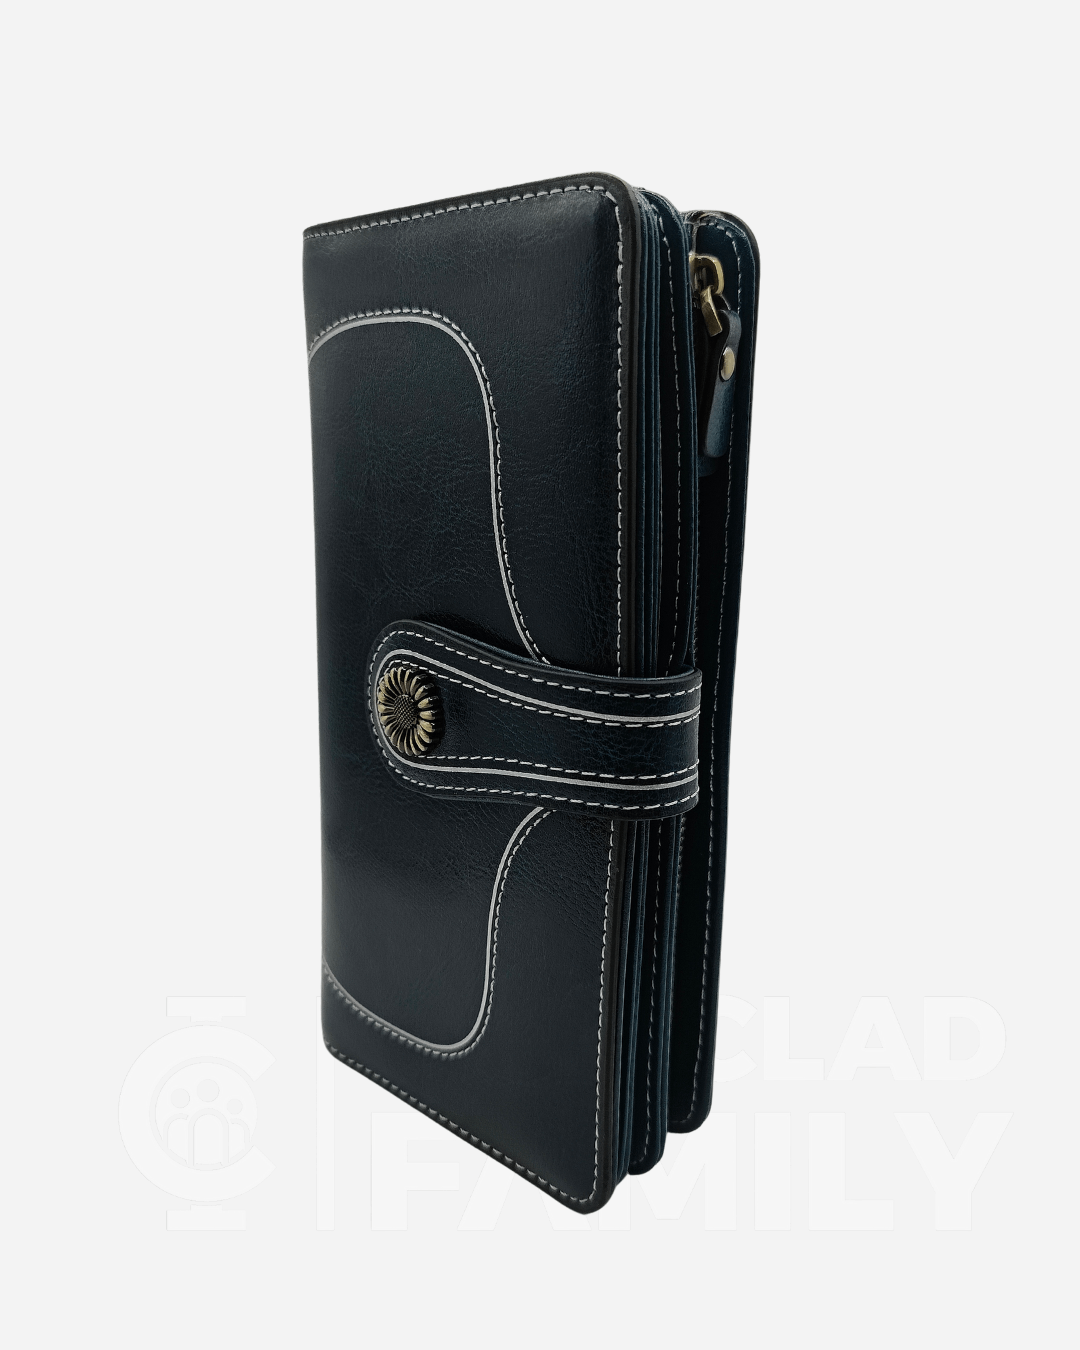 Blue RFID blocking large capacity leather wallet with two compartments